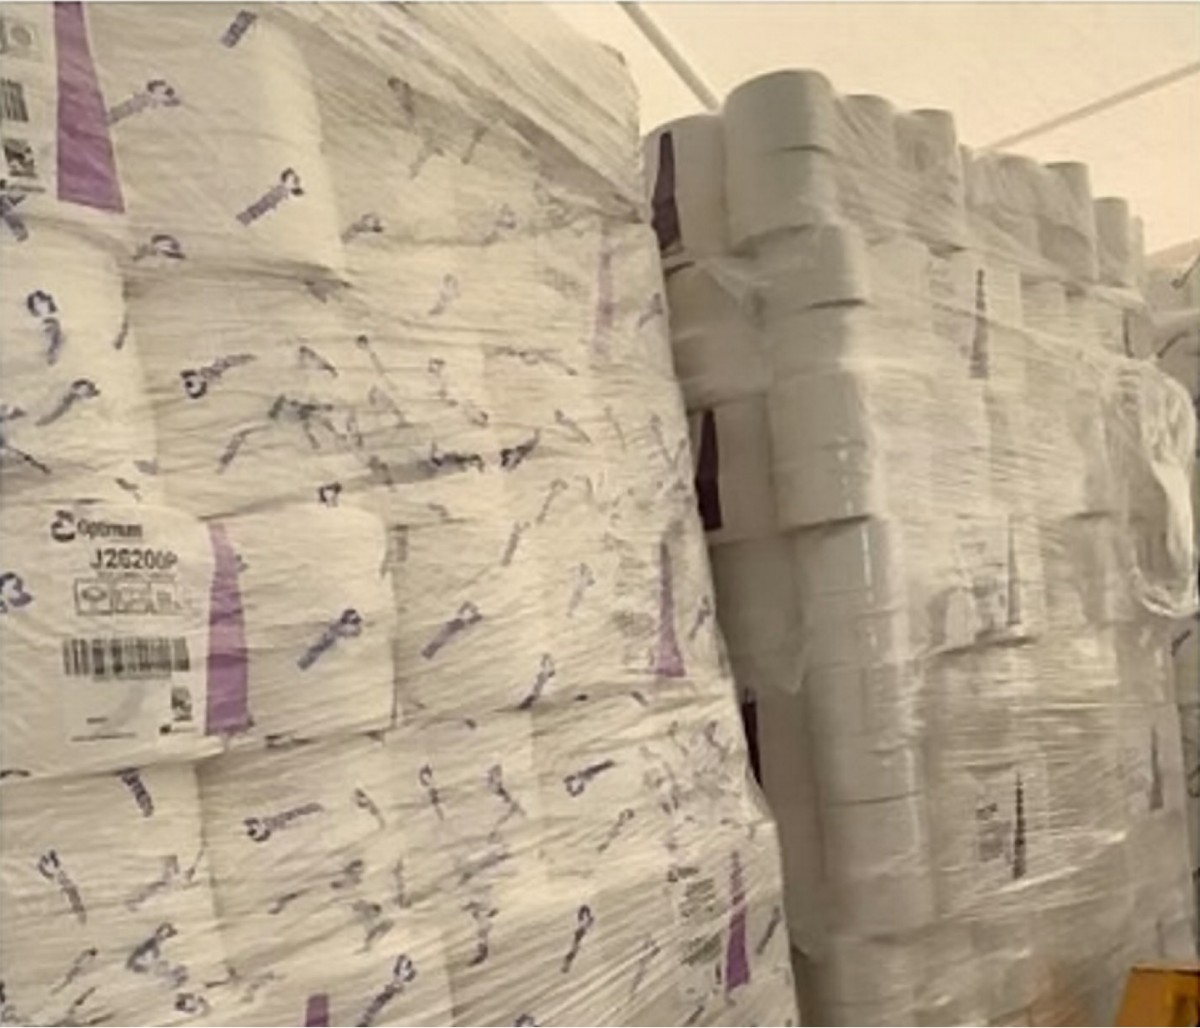 Toilet delivery man lists 200,000 loo rolls for sale after Boardmasters Festival is cancelled